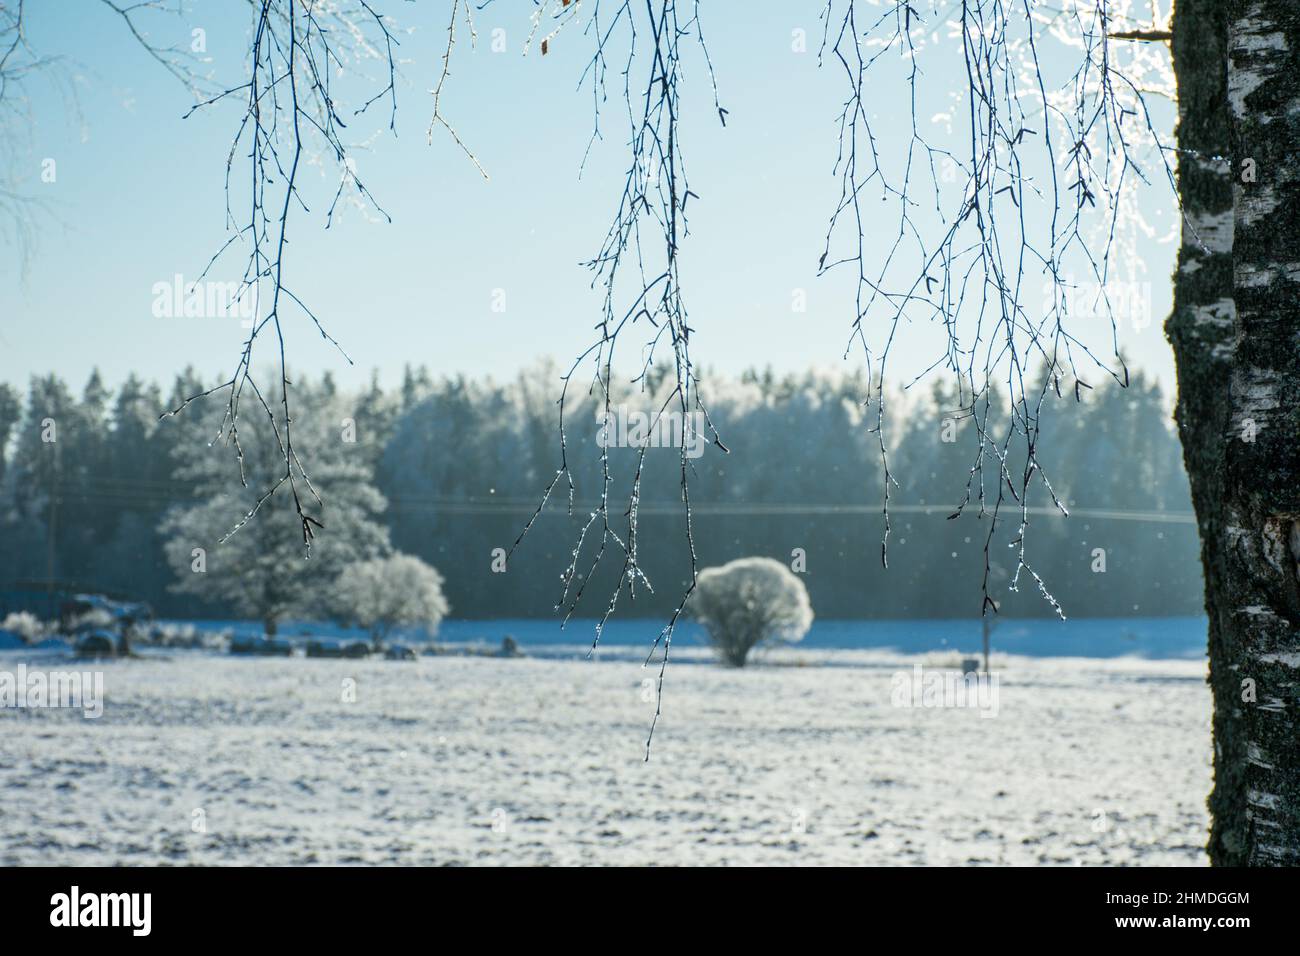 Winter landscape with snowy fields and icy birches in the foreground. Background image Stock Photo